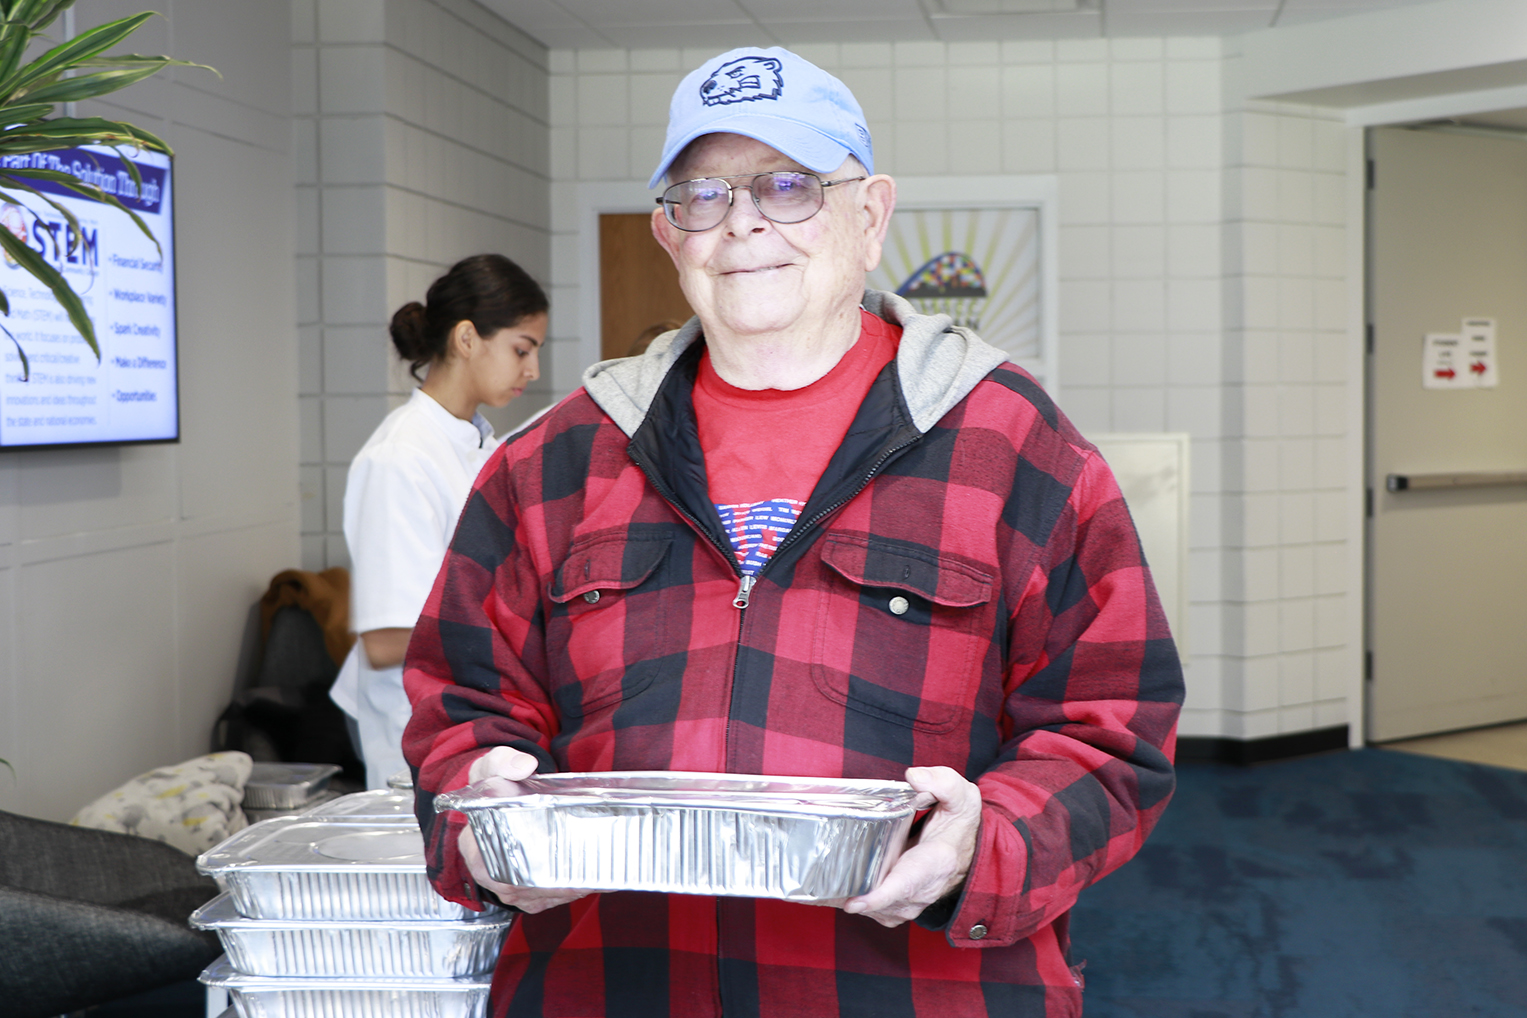 Lonnie Evans of Urbandale poses for a quick photo on Wed., Nov. 22, 2023, at the DMACC Urban Campus after picking up his order of a dozen dinner rolls through the DMACC Baking and Pastry Arts program's Fourth Annual Thanksgiving Dinner Roll Fundraiser.